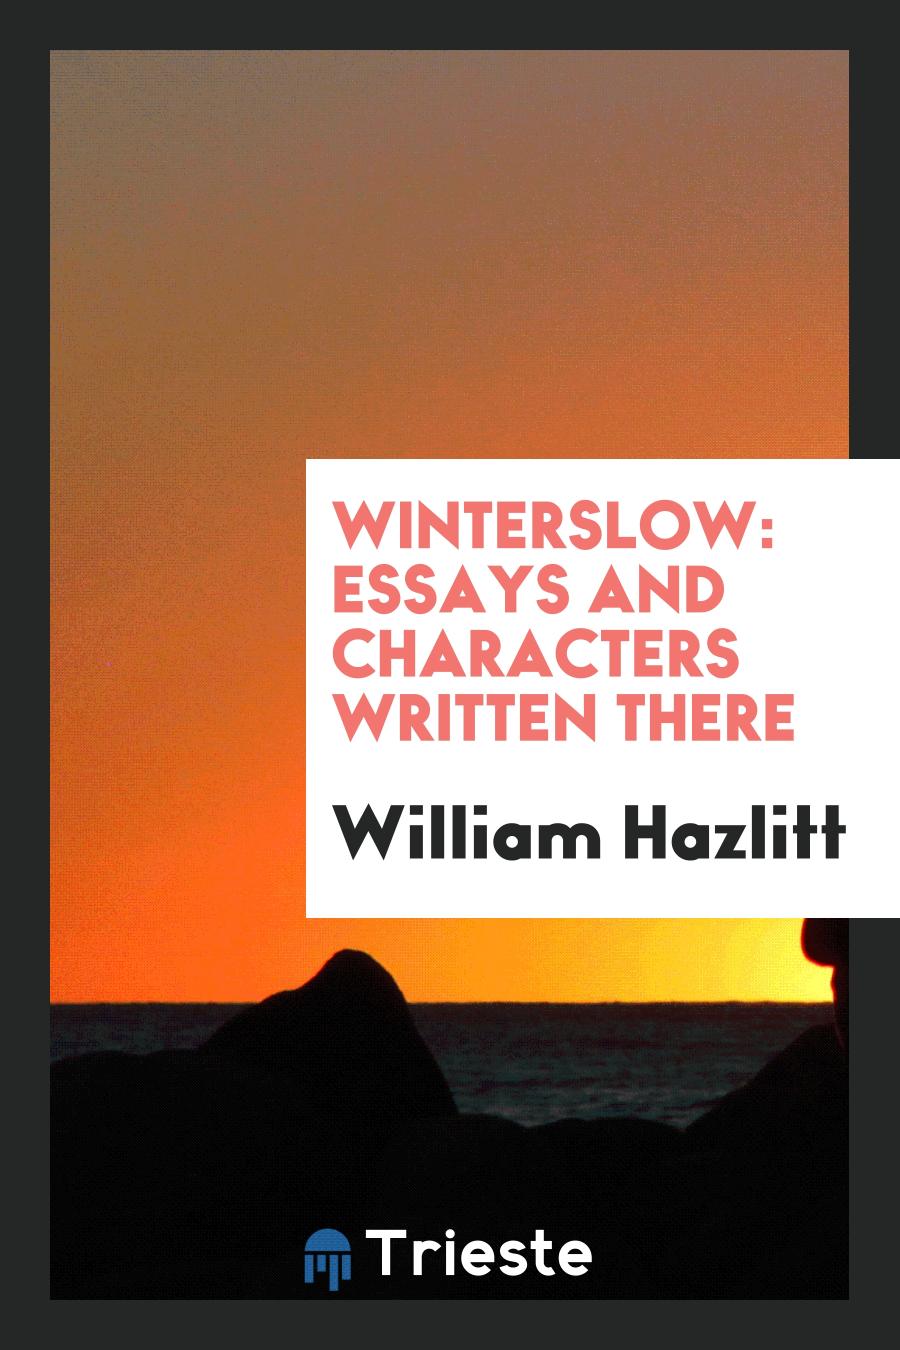 Winterslow: essays and characters written there